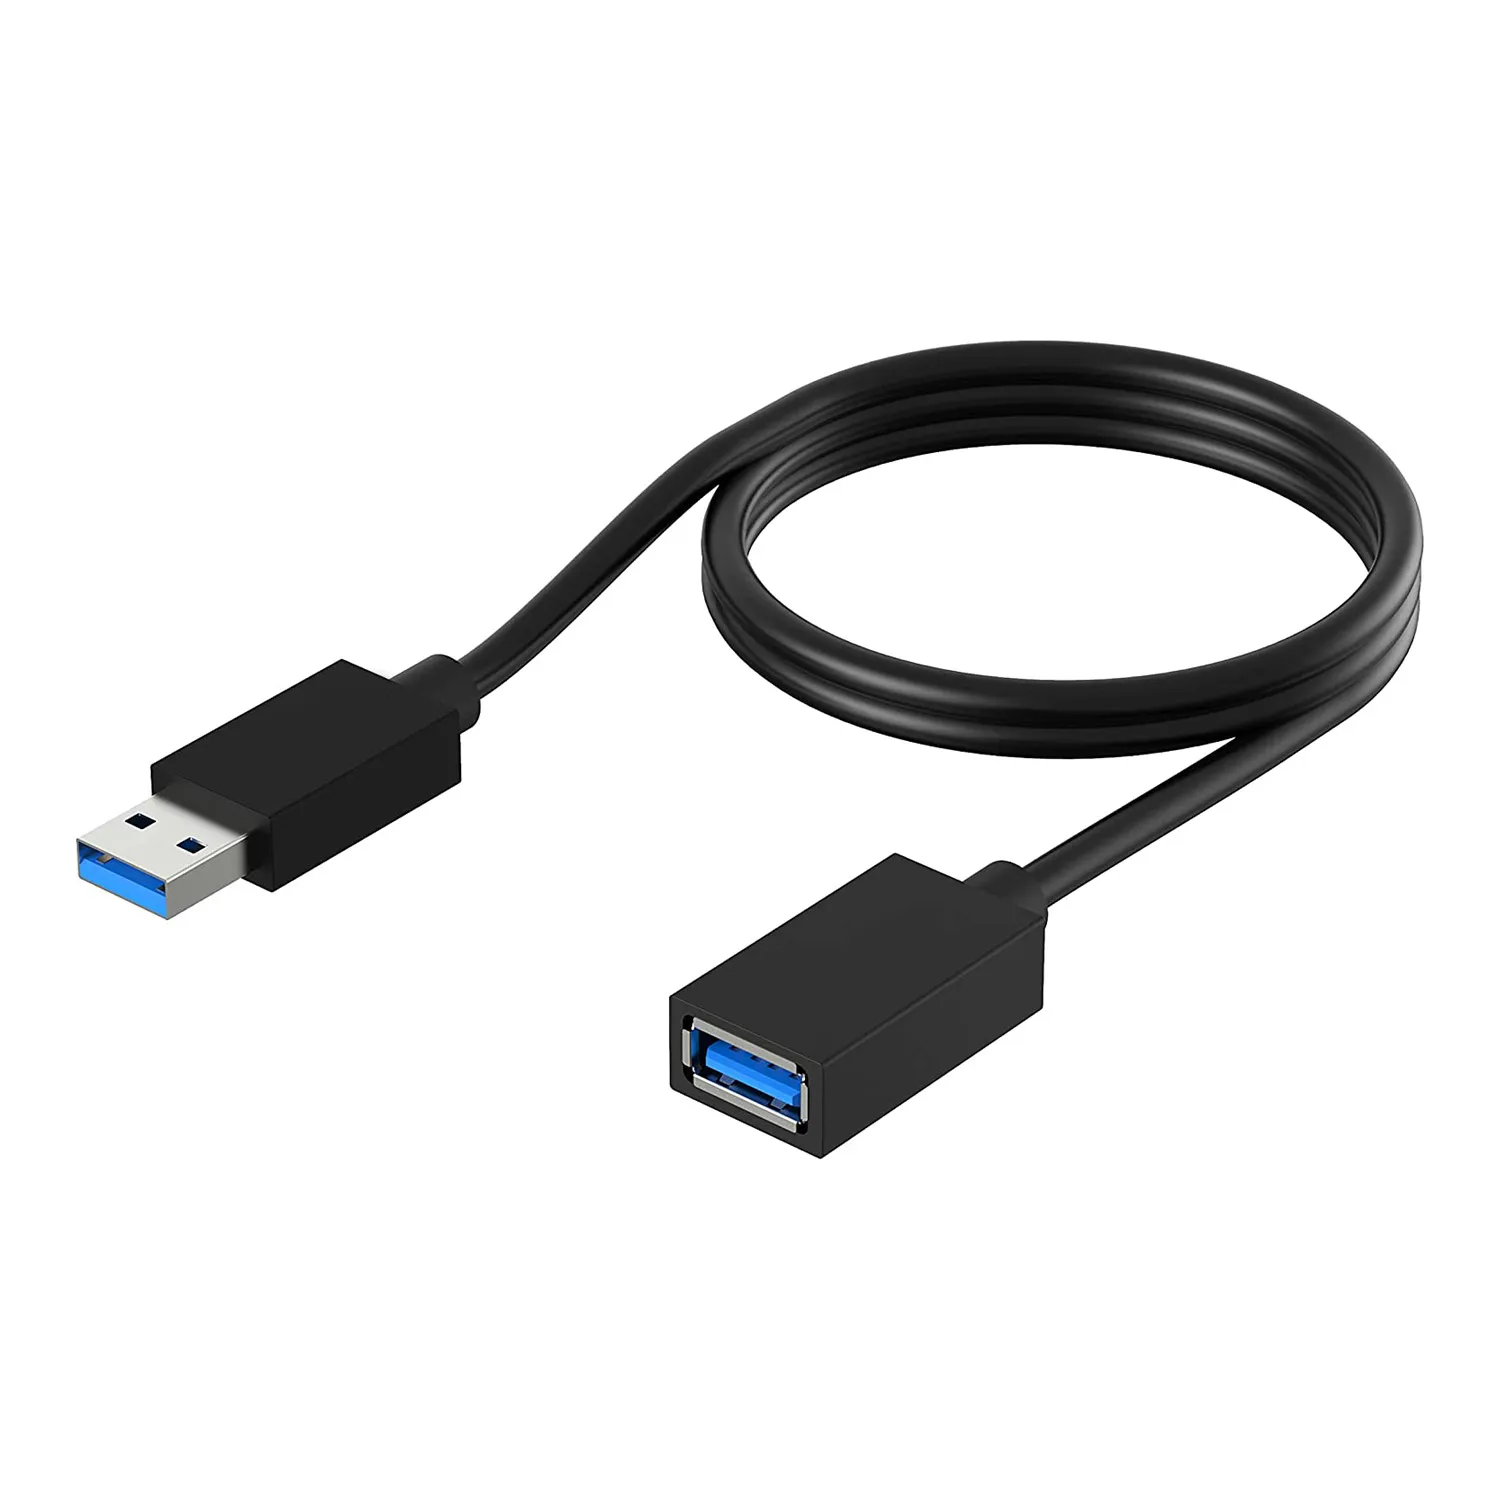 USB Extension Cable Type A Male to Female Extension Cord, Data Transfer Compatible with USB Keyboard,Mouse,Flash Drive